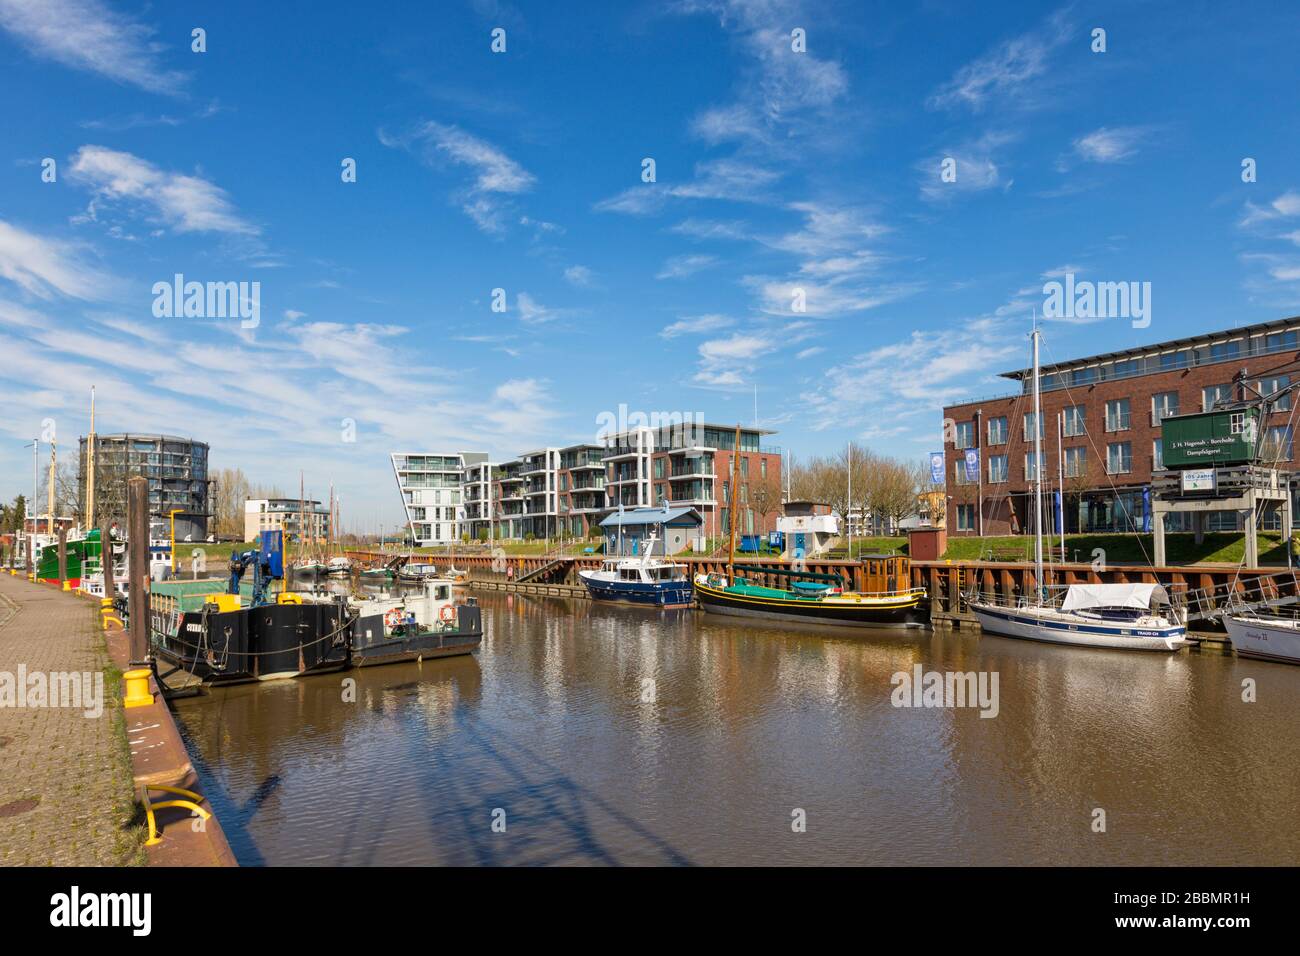 City harbor or Stadthafen at Stade in Lower Saxony, Germany Stock Photo